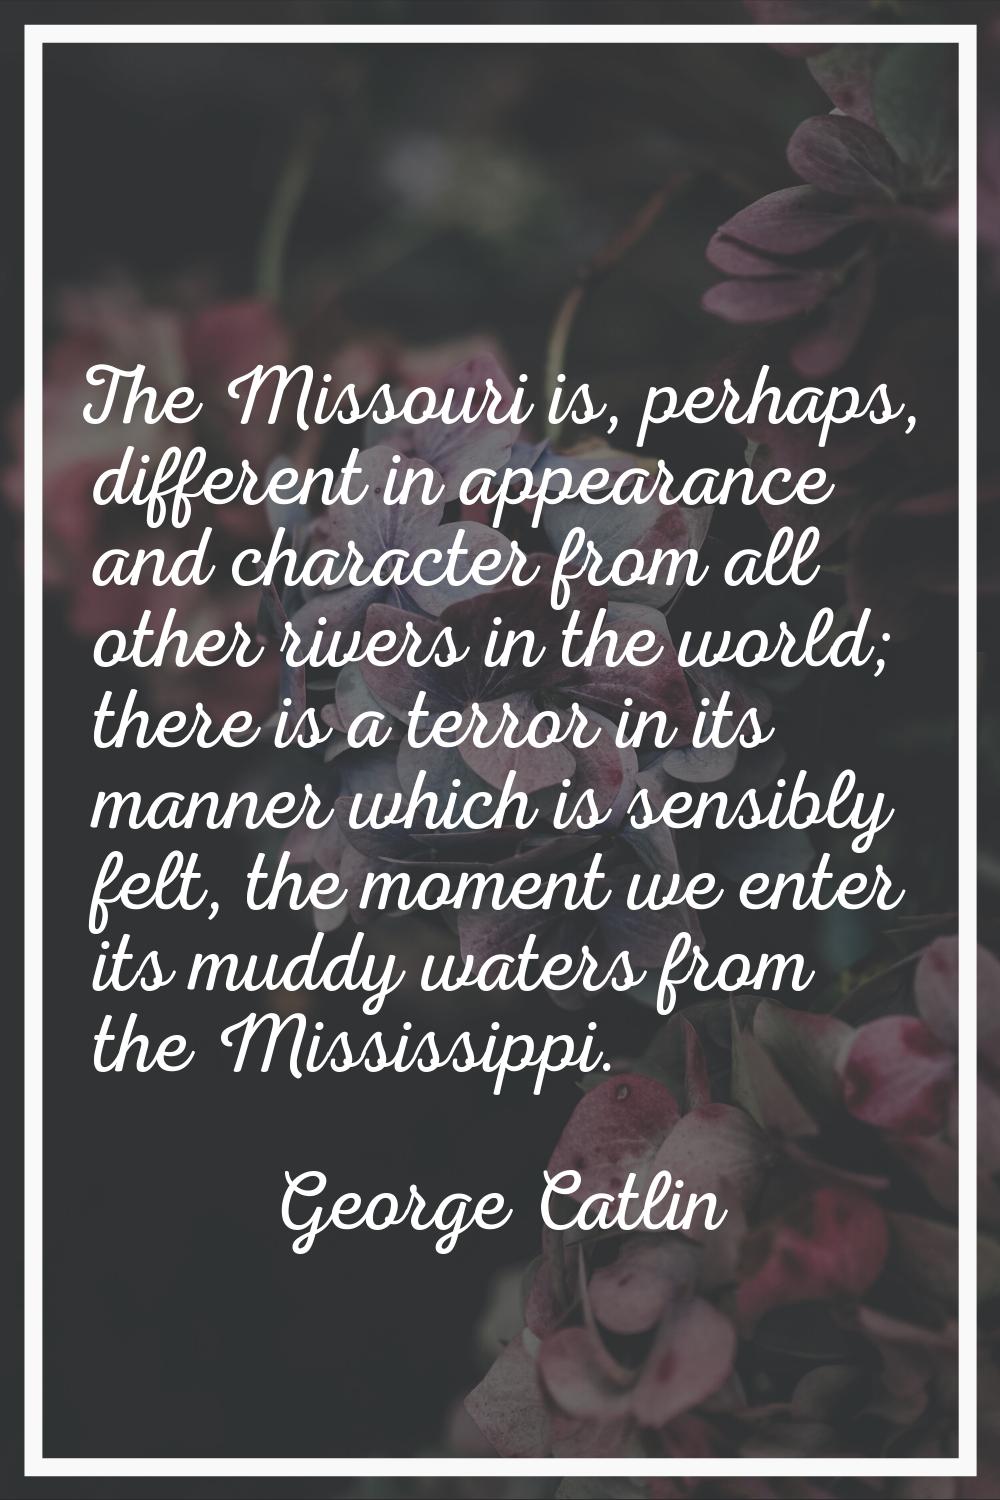 The Missouri is, perhaps, different in appearance and character from all other rivers in the world;